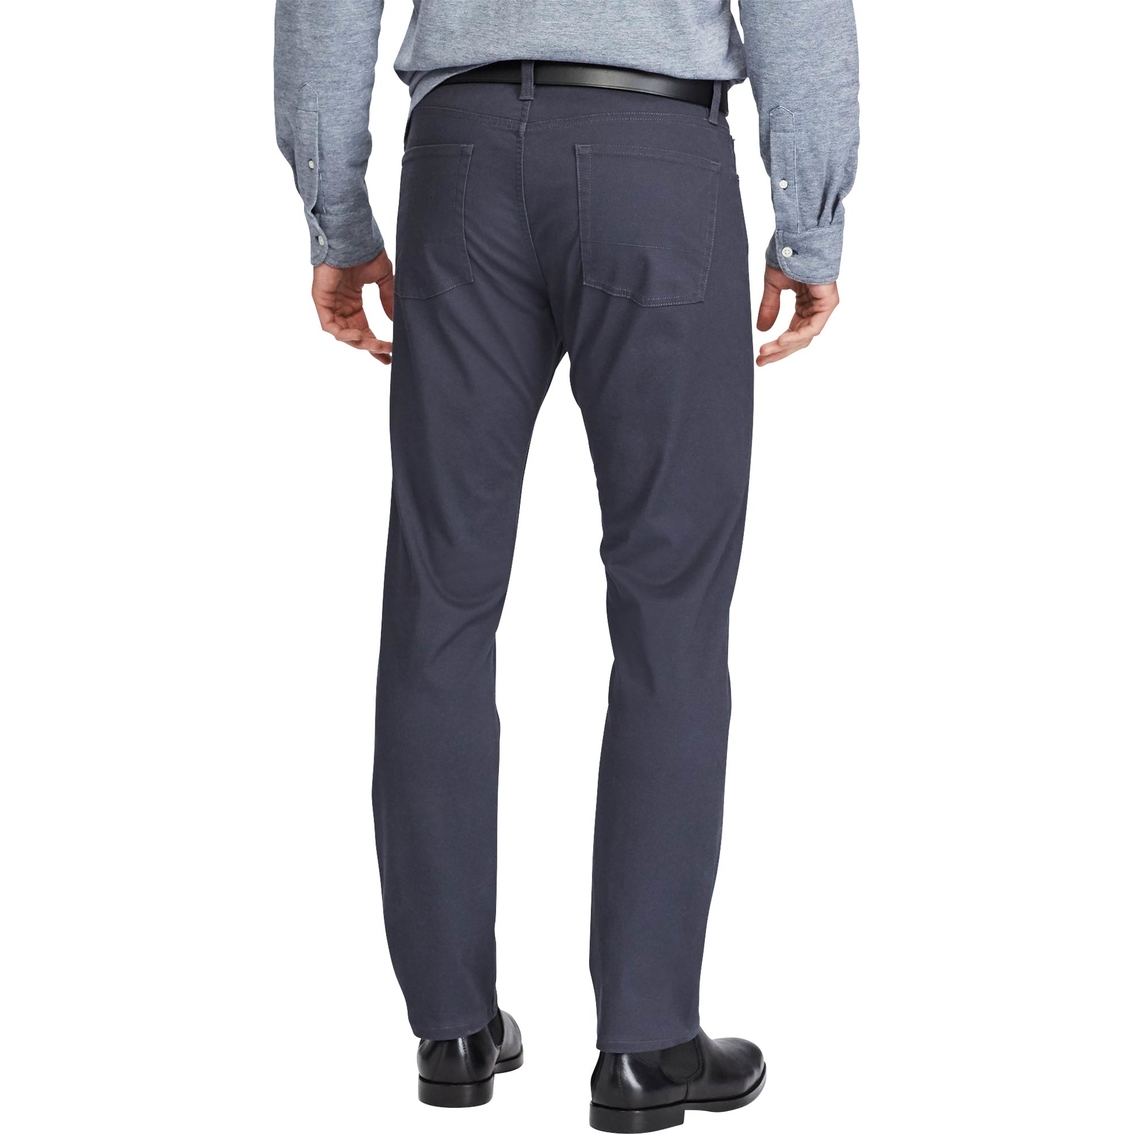 Chaps Straight Fit Stretch Twill 5-pocket Pants, Pants